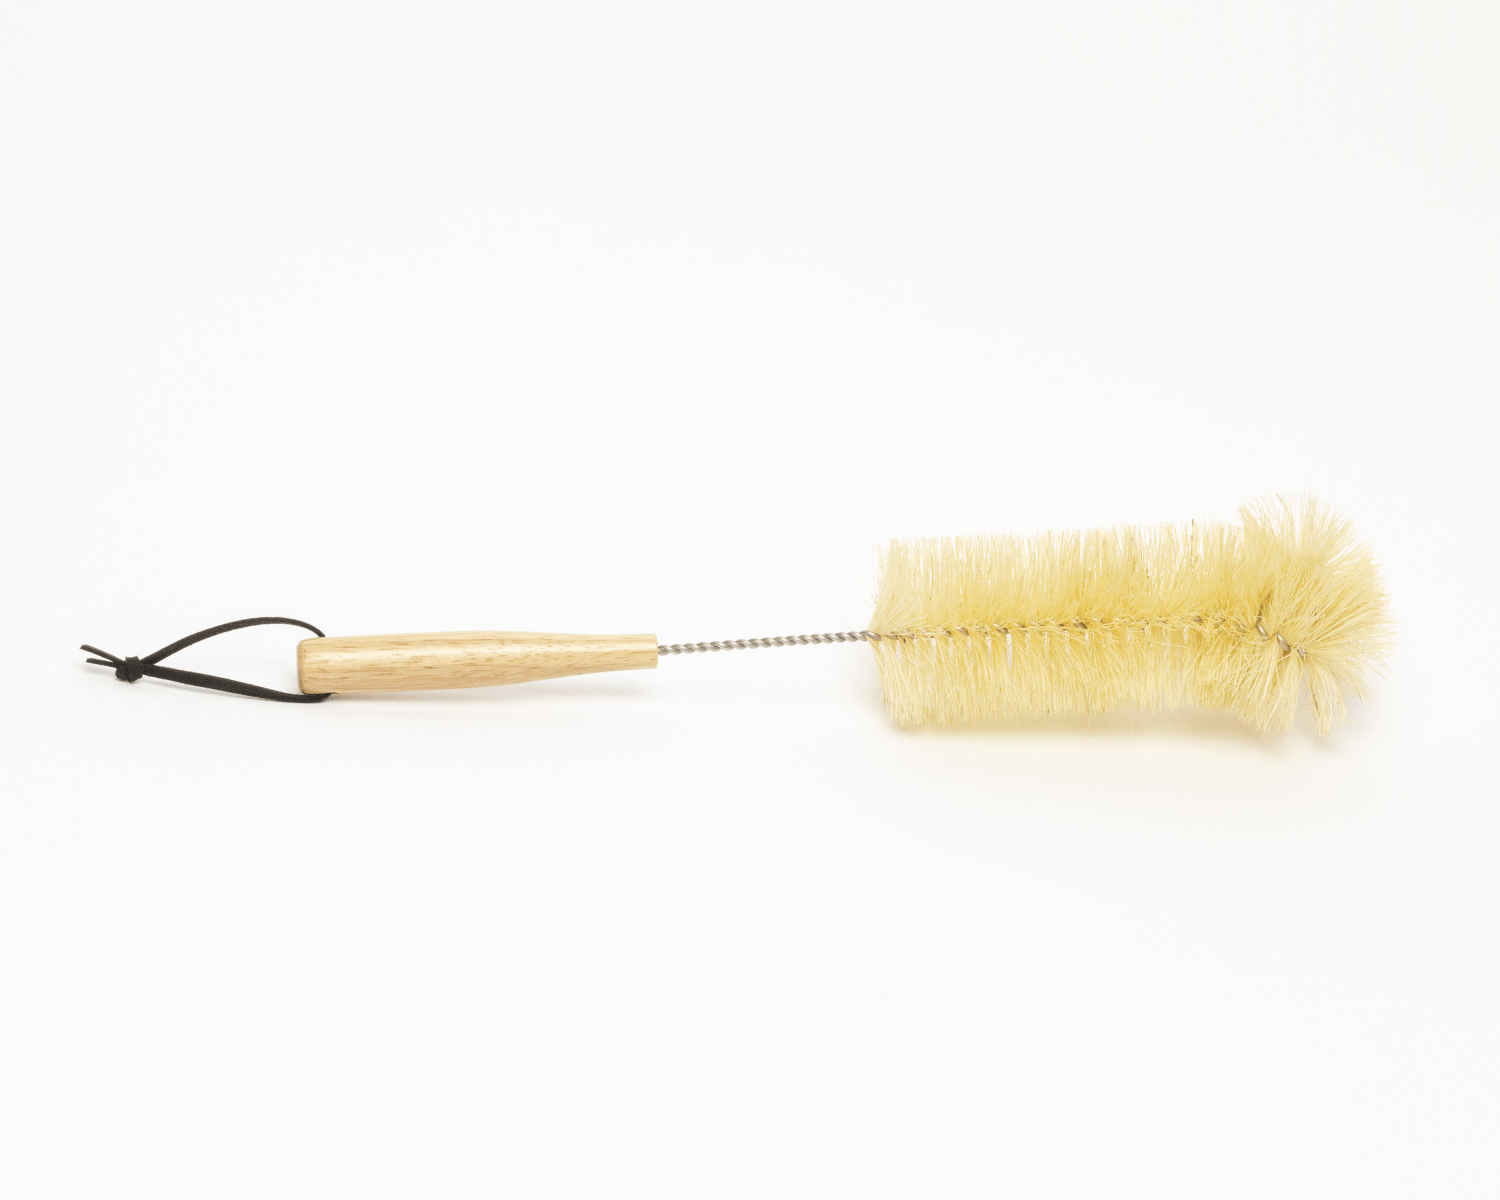 Hitch Bottle Brush with Natural Sisal Fibers, a stainless steel rod, and wooden handle 